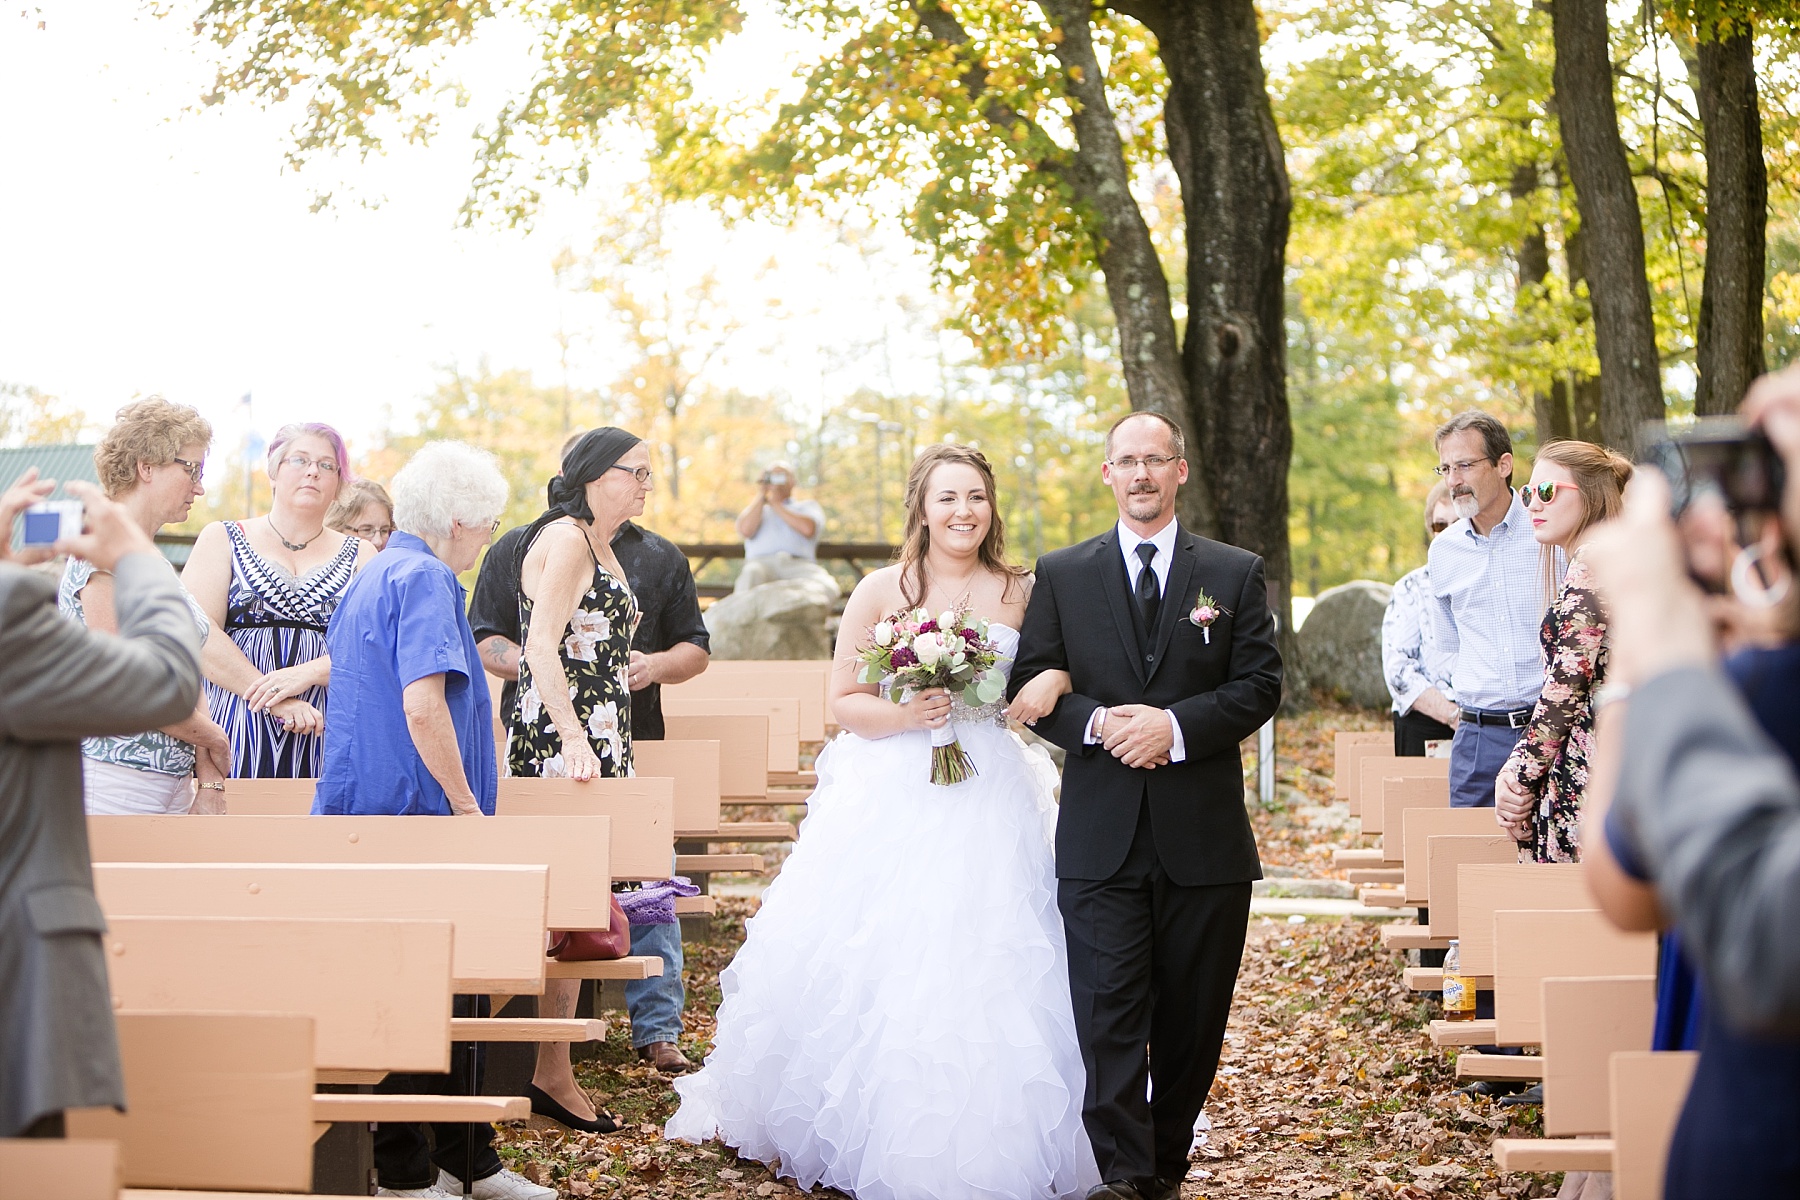 Leaves falling from the trees, a chairlift ride to see Wausau from above.. it was a wonderful fall Rib Mountain Amphitheater wedding for Bella & Dylan.